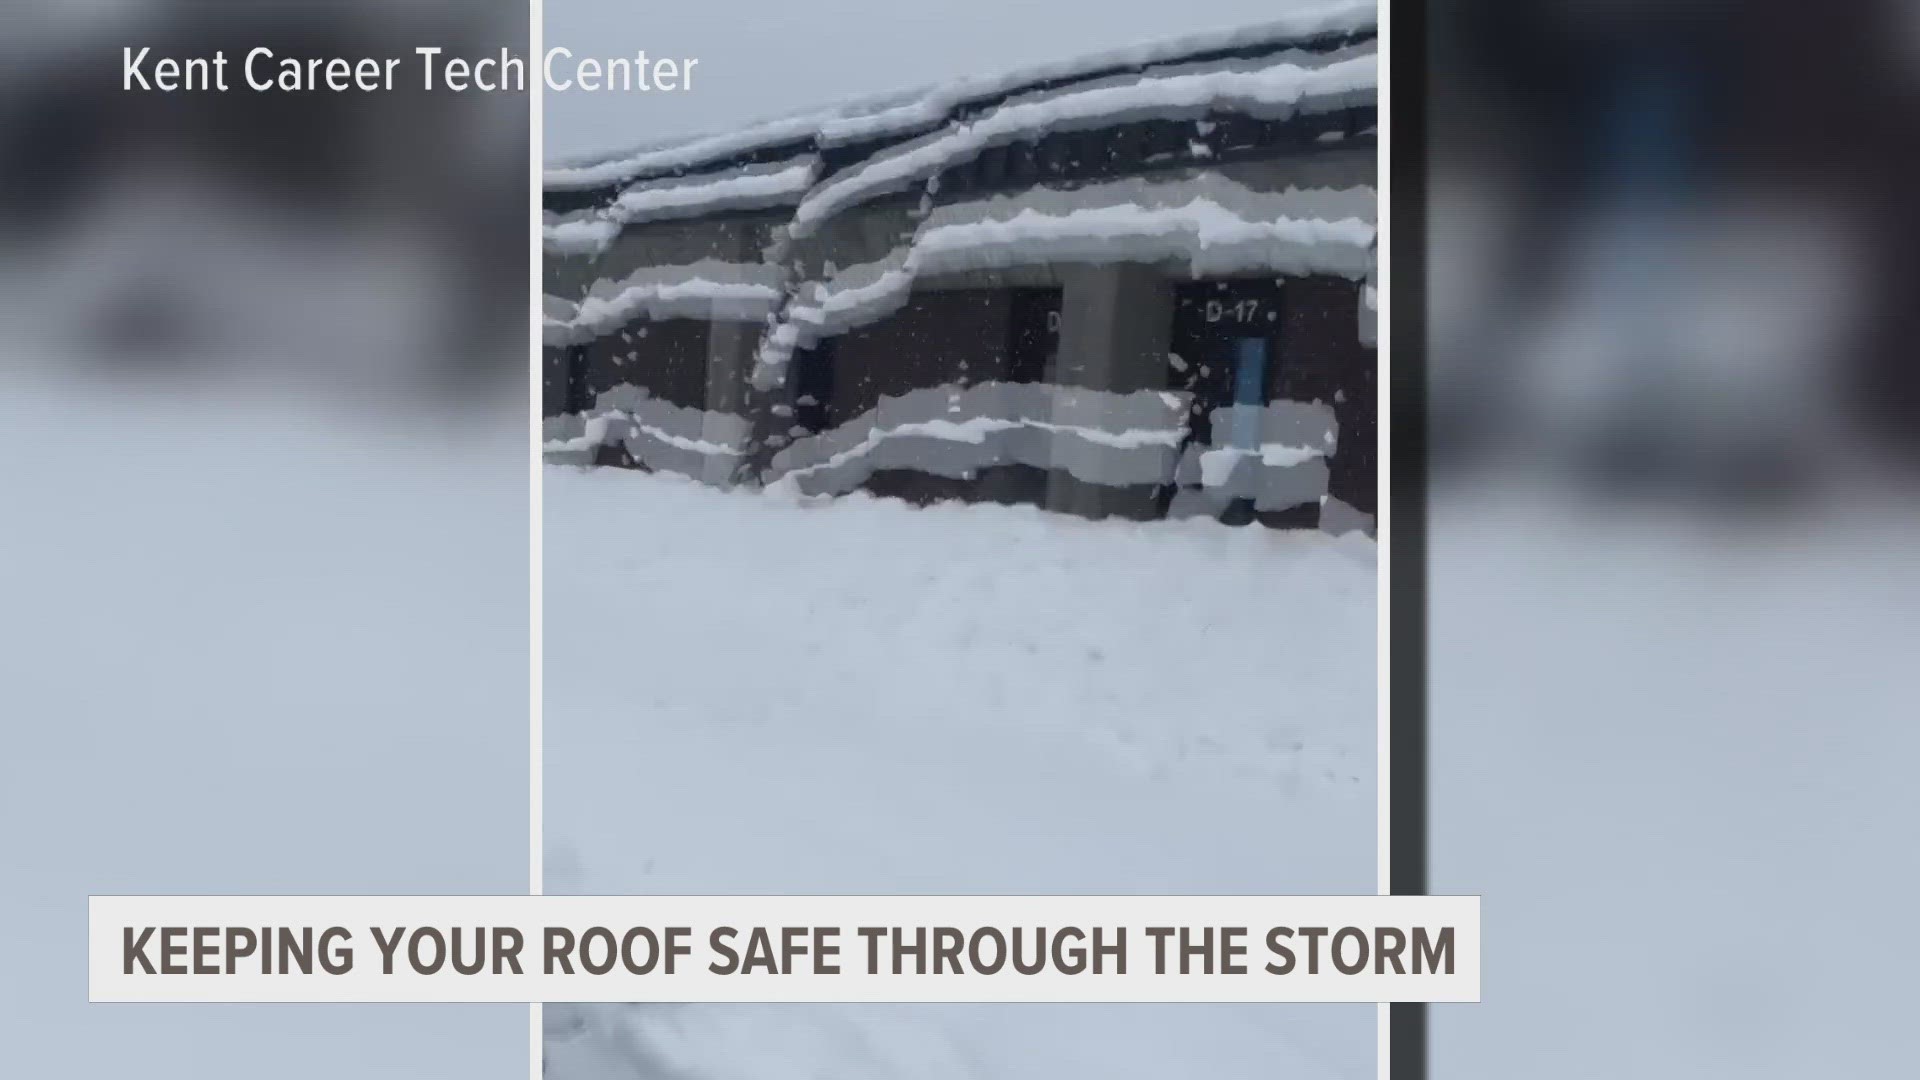 KCTC in Grand Rapids posted a video showing snow run off their roof after the first snowfall. How can you get your home or business prepared for the snow?